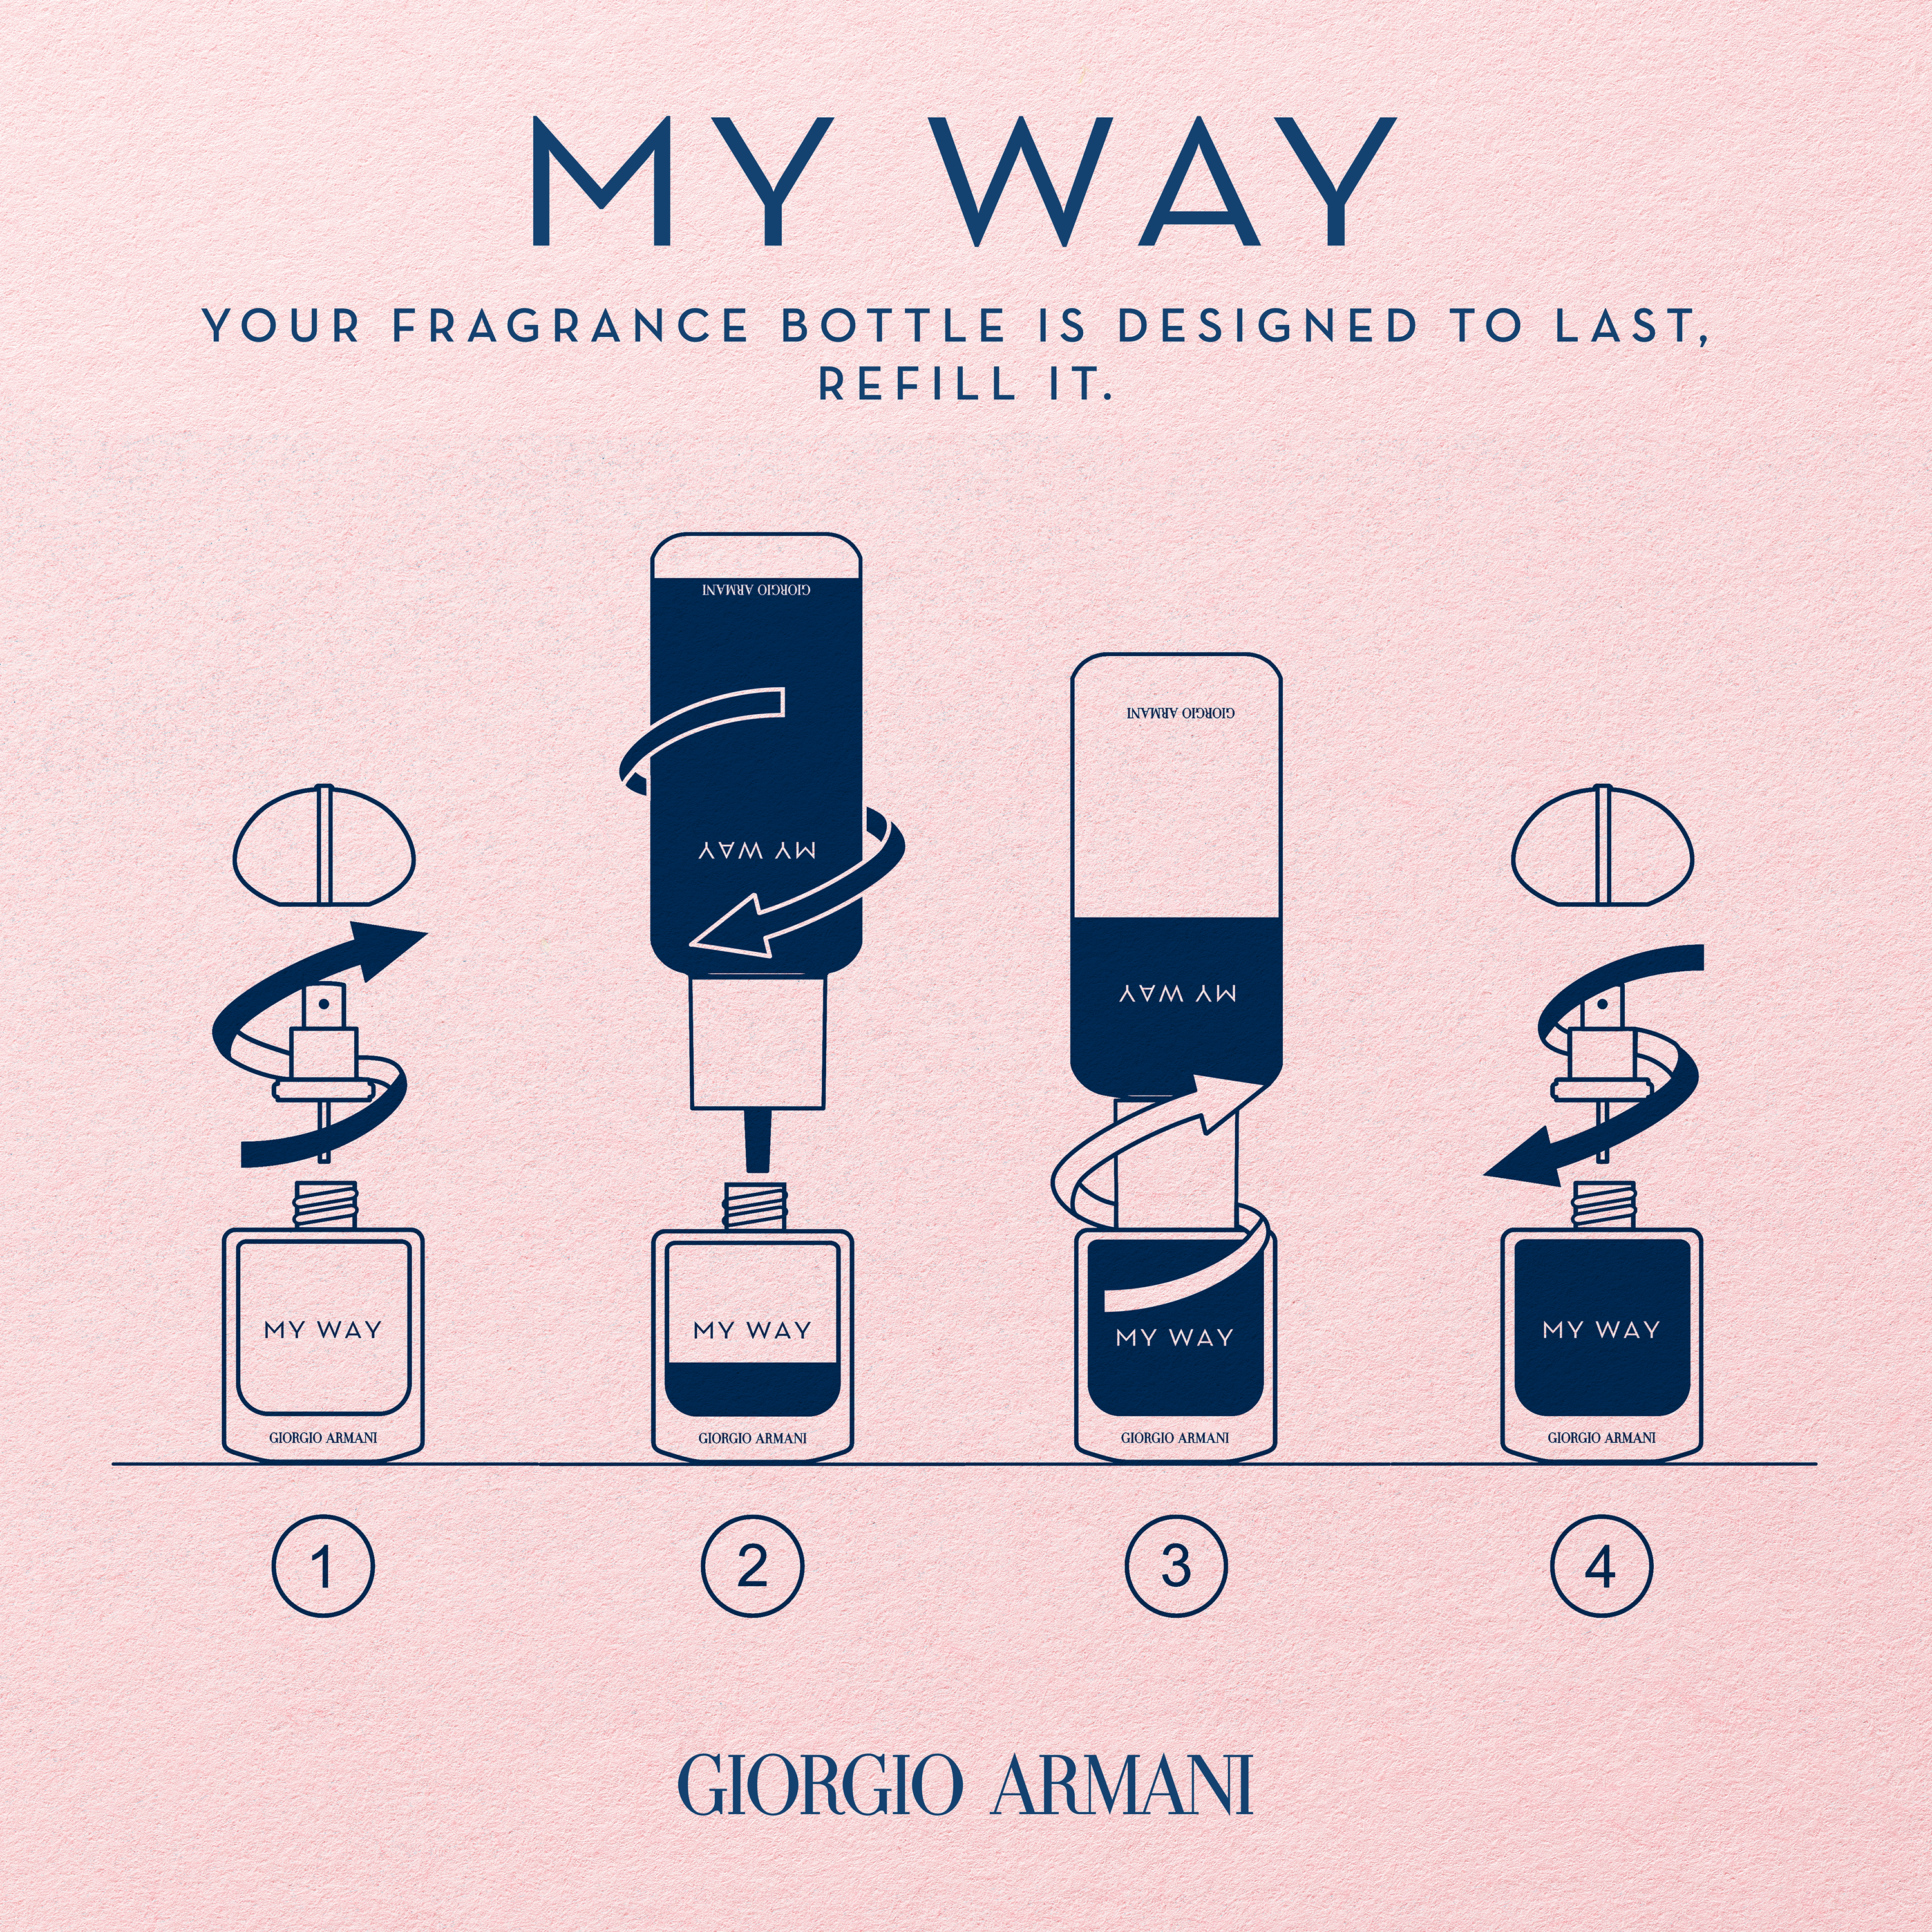 Image 1- my way, your fragrance bottle is designed to last, refill it. Image shows the refill process. Georgio Armani